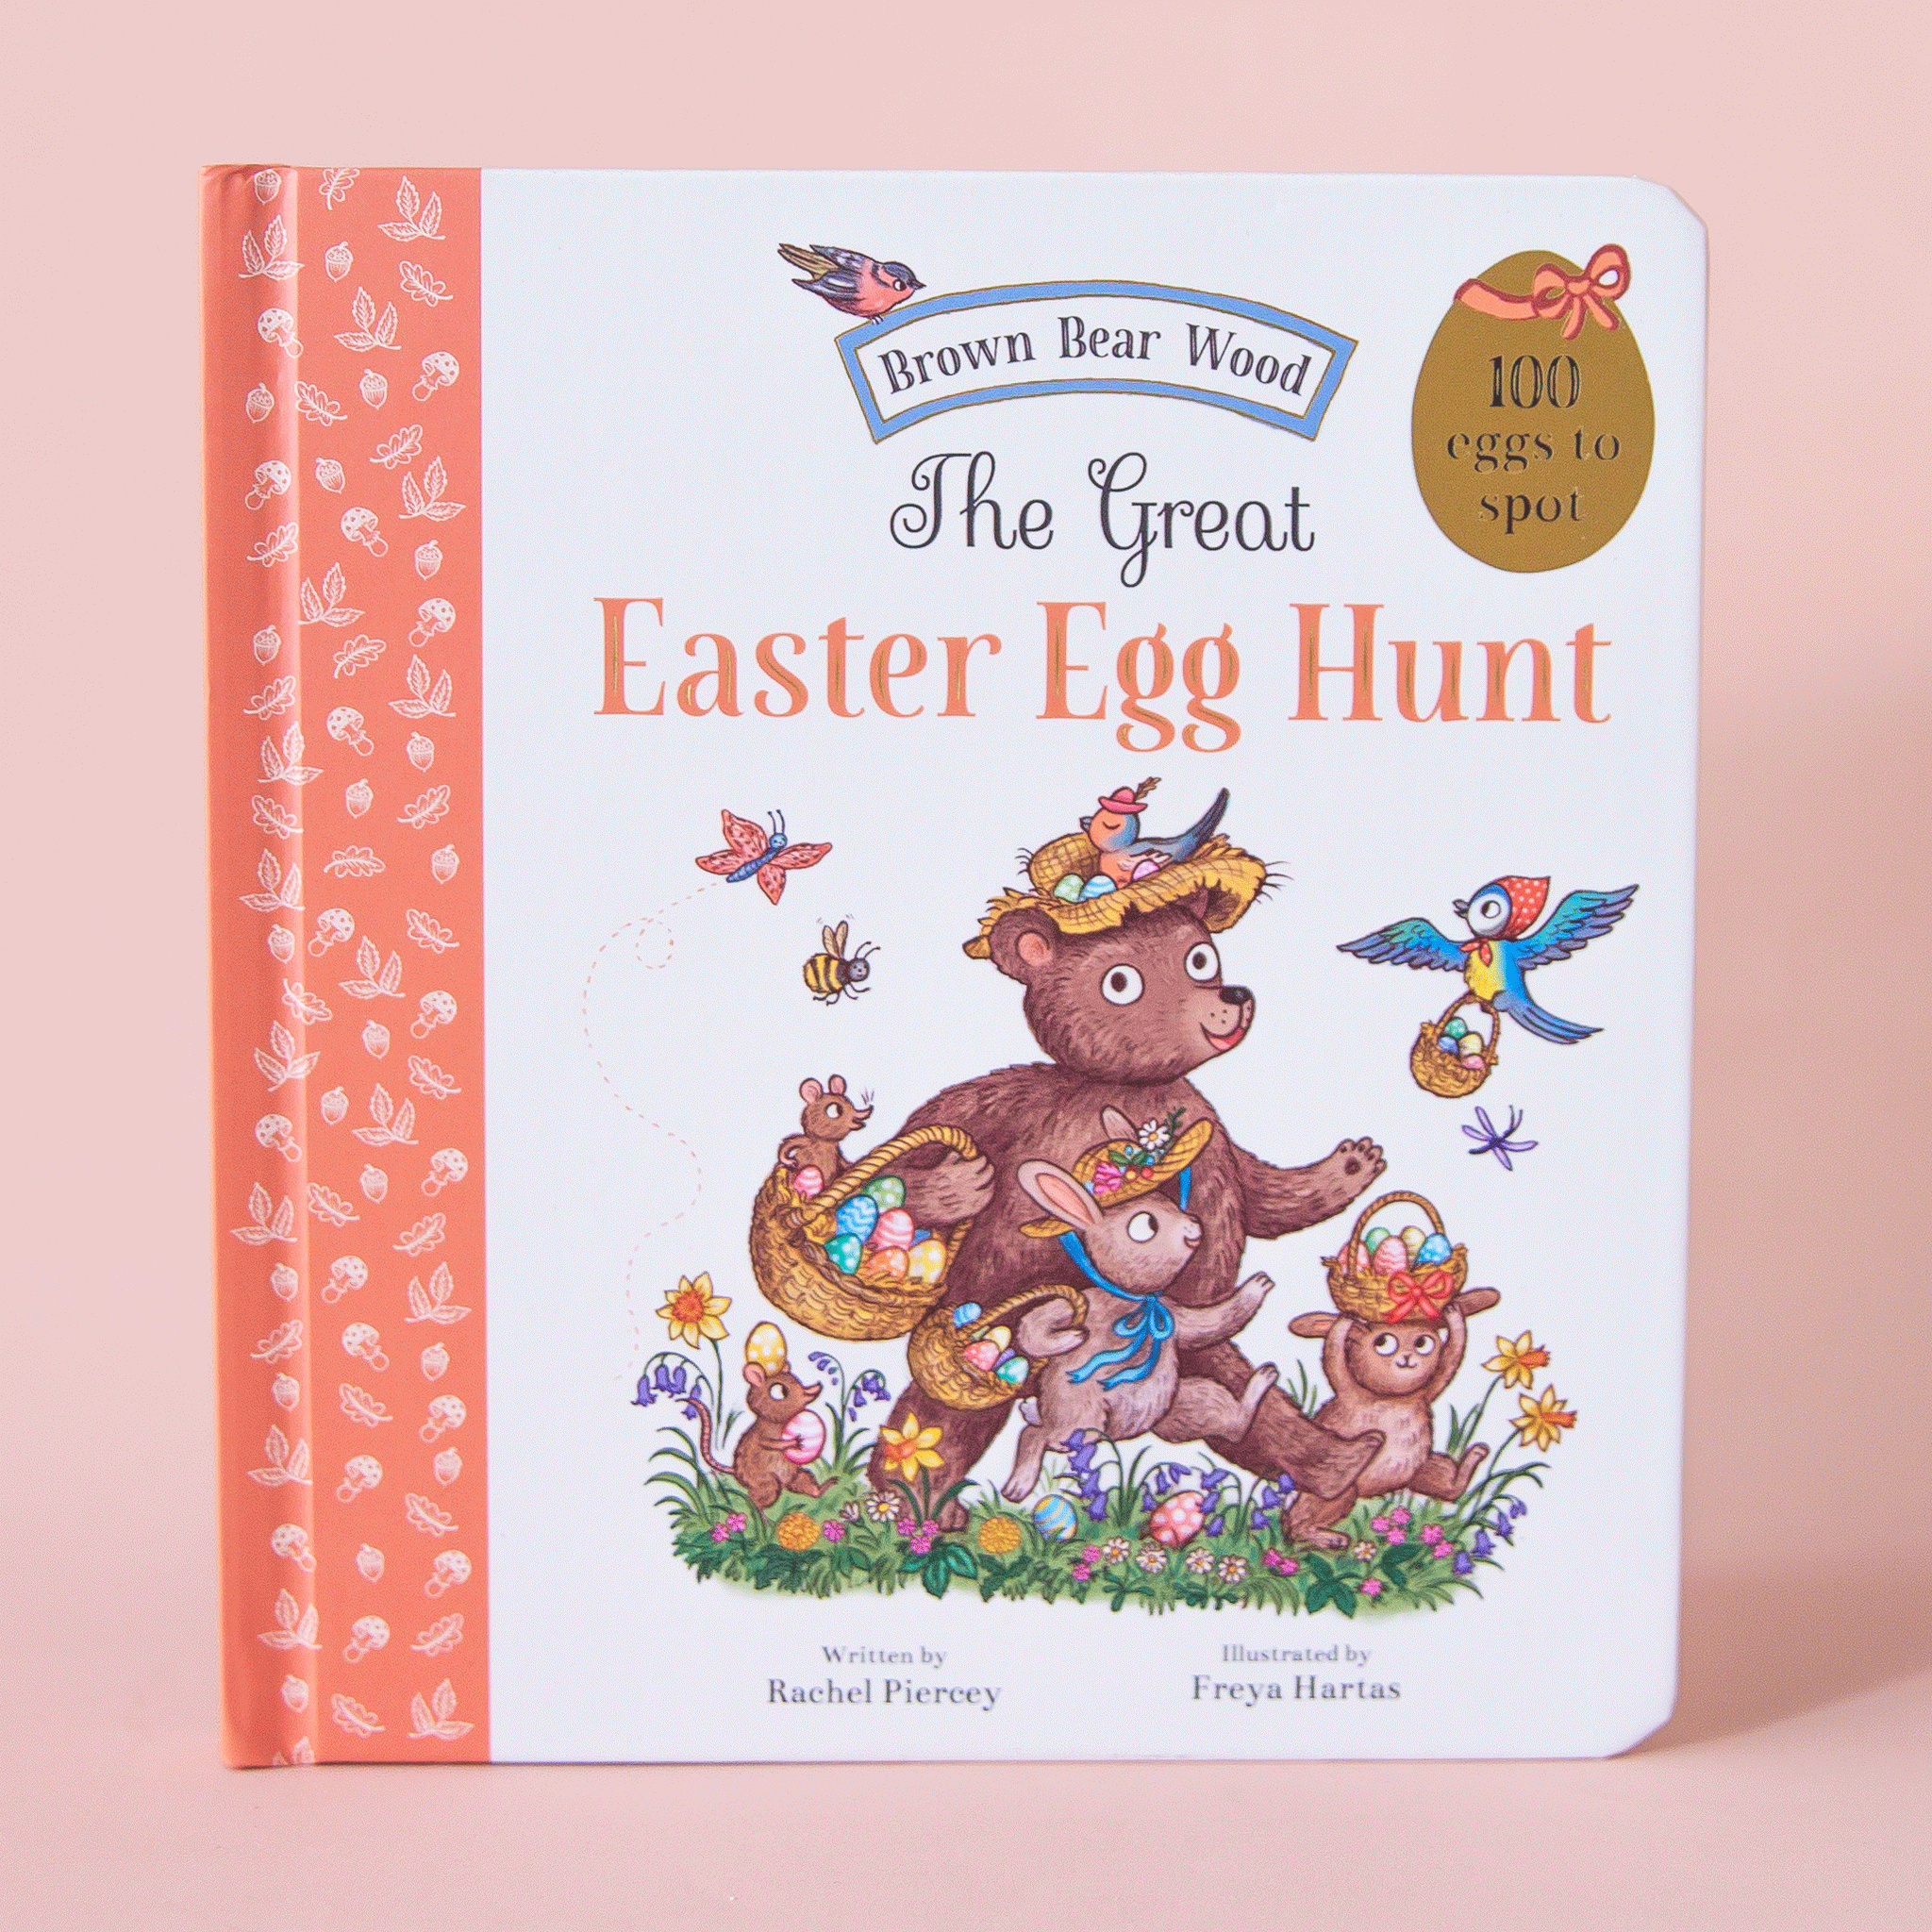 On a pink background is a white and orange book cover with an illustration of a group of woodland animals holding baskets with easter eggs inside along with the title above it that reads, "The Great Easter Egg Hunt".